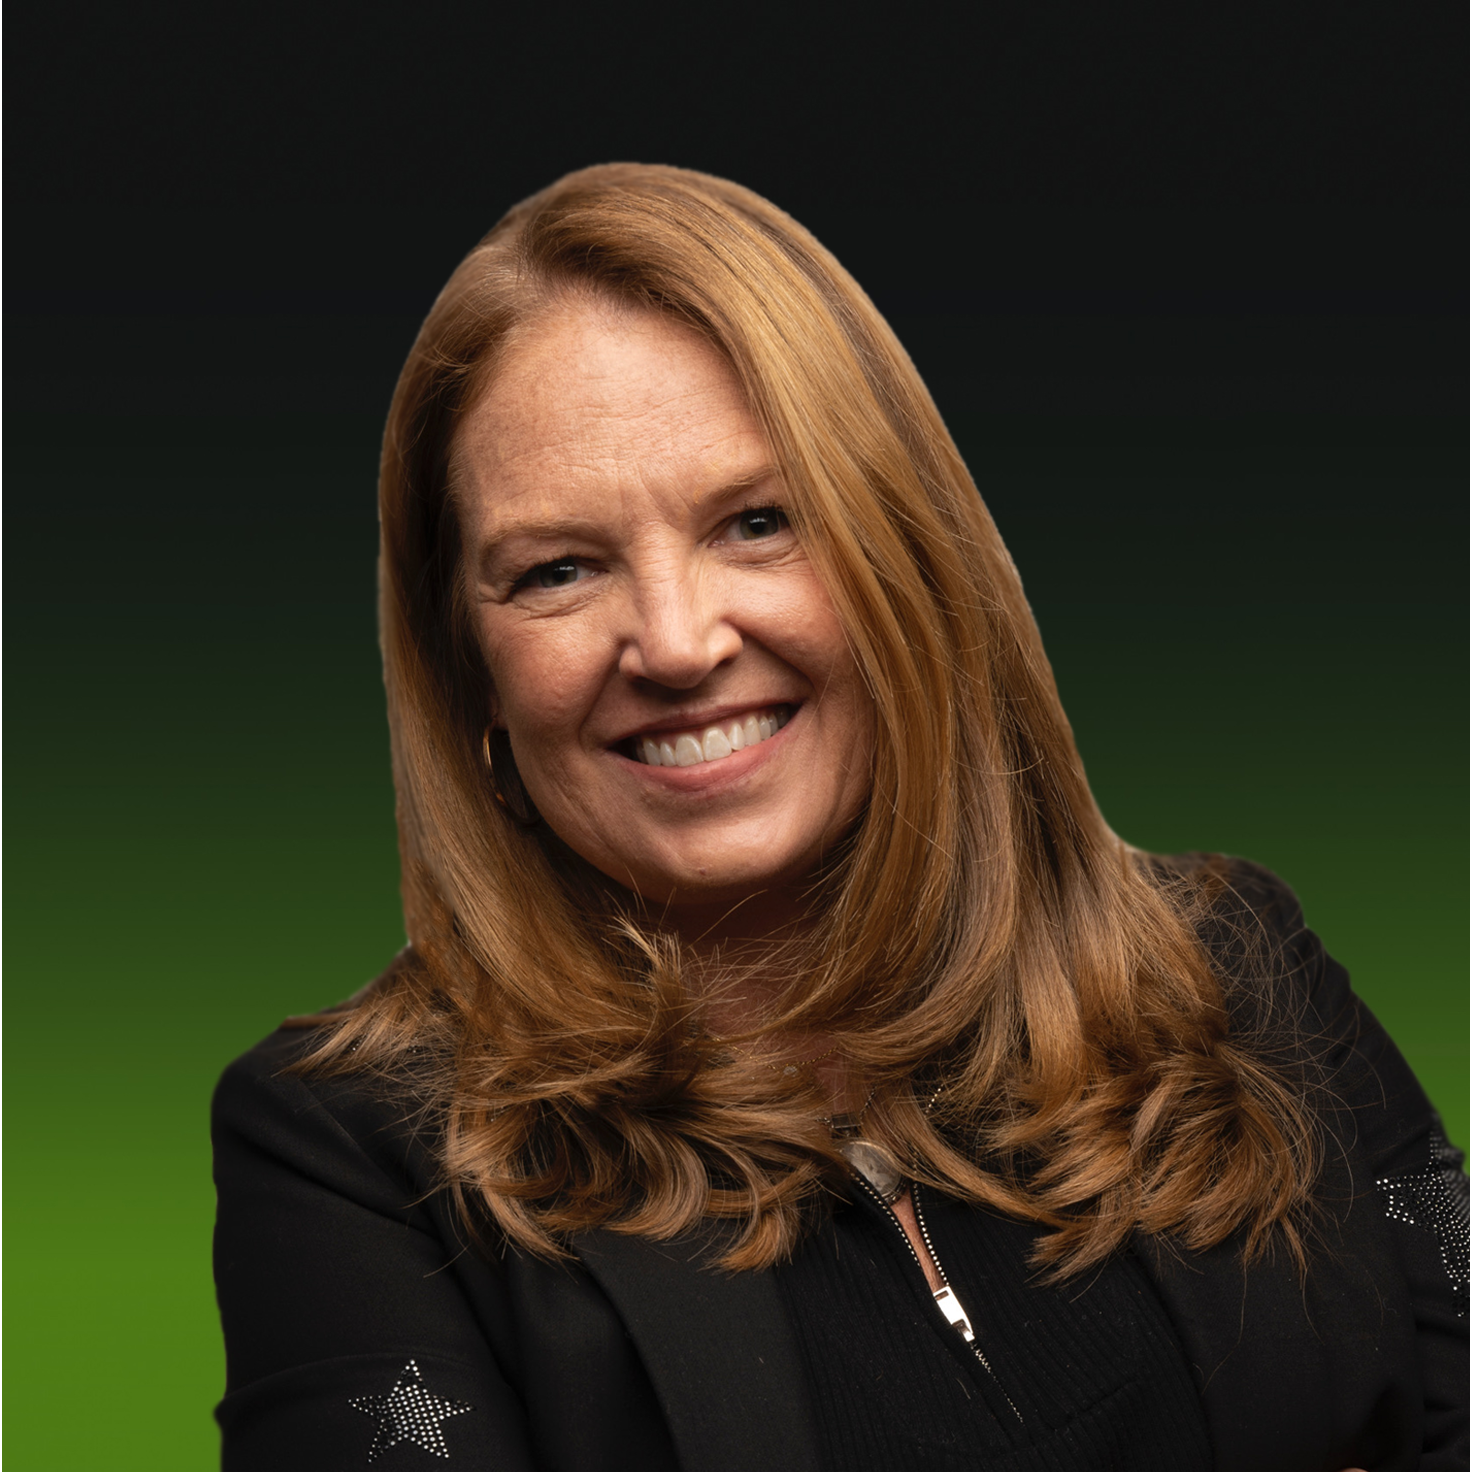 Cover image for  article: H&R Block's Jill Cress Discusses How to Give Brand Purpose "A Fair Shot"